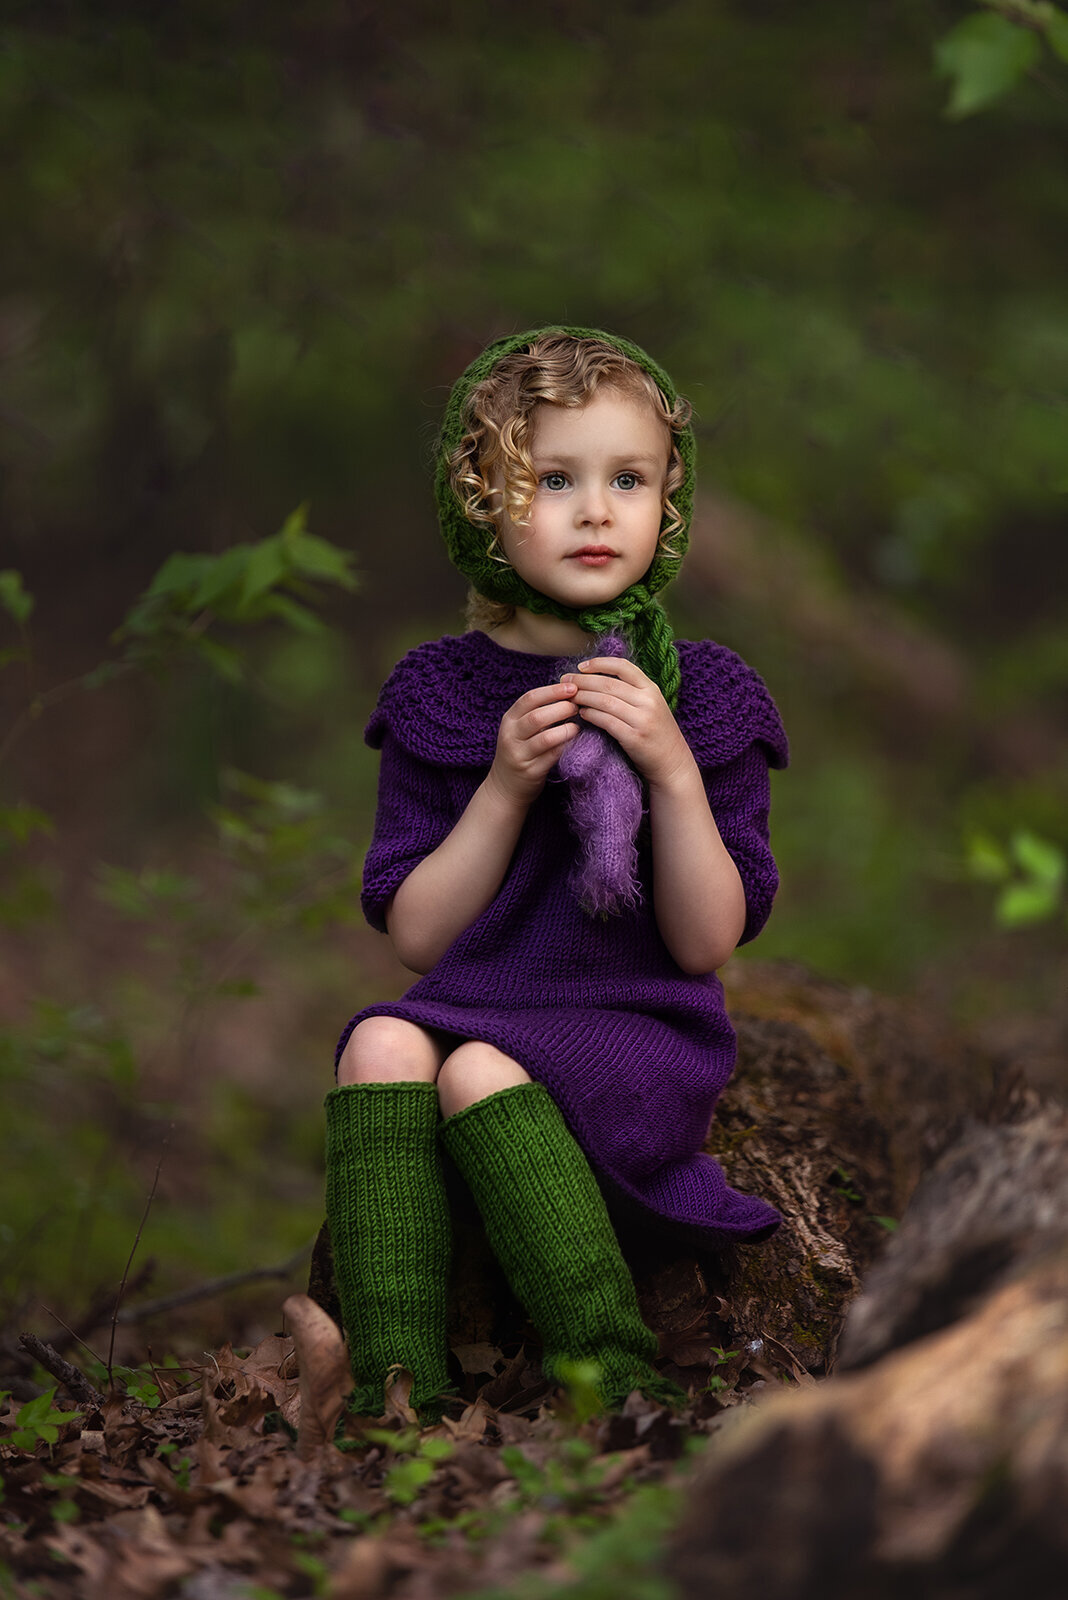 girl holding bear in purple dress and green bonnet and stockings outside on a log